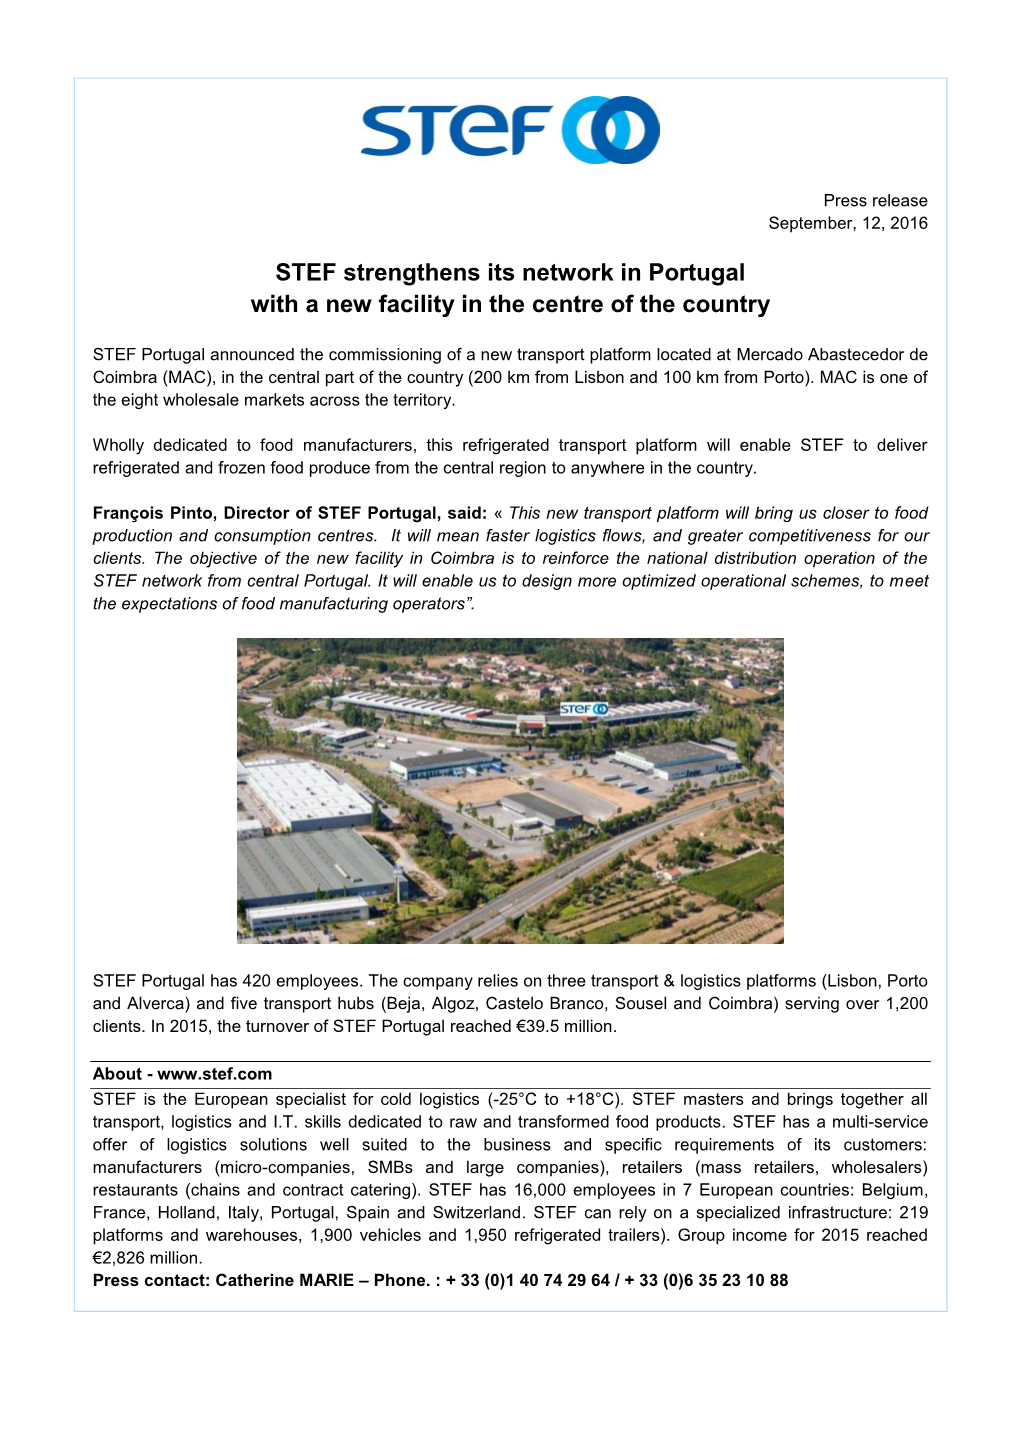 STEF Strengthens Its Network in Portugal with a New Facility in the Centre of the Country